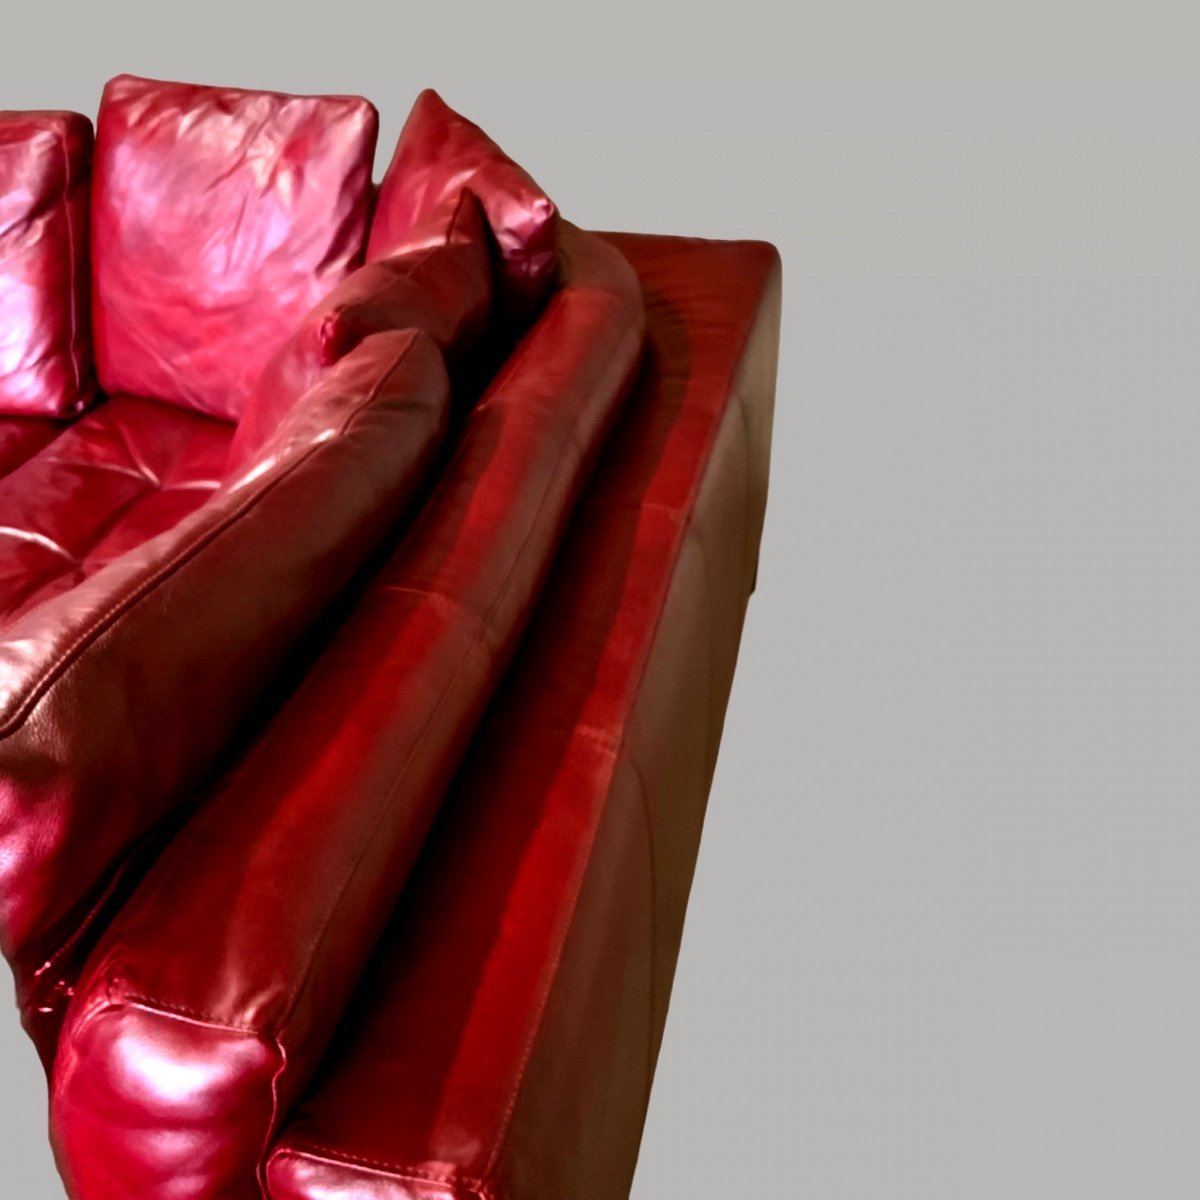 Natuzzi Corner Sofa In Red Leather From The 1980s/90s-photo-6